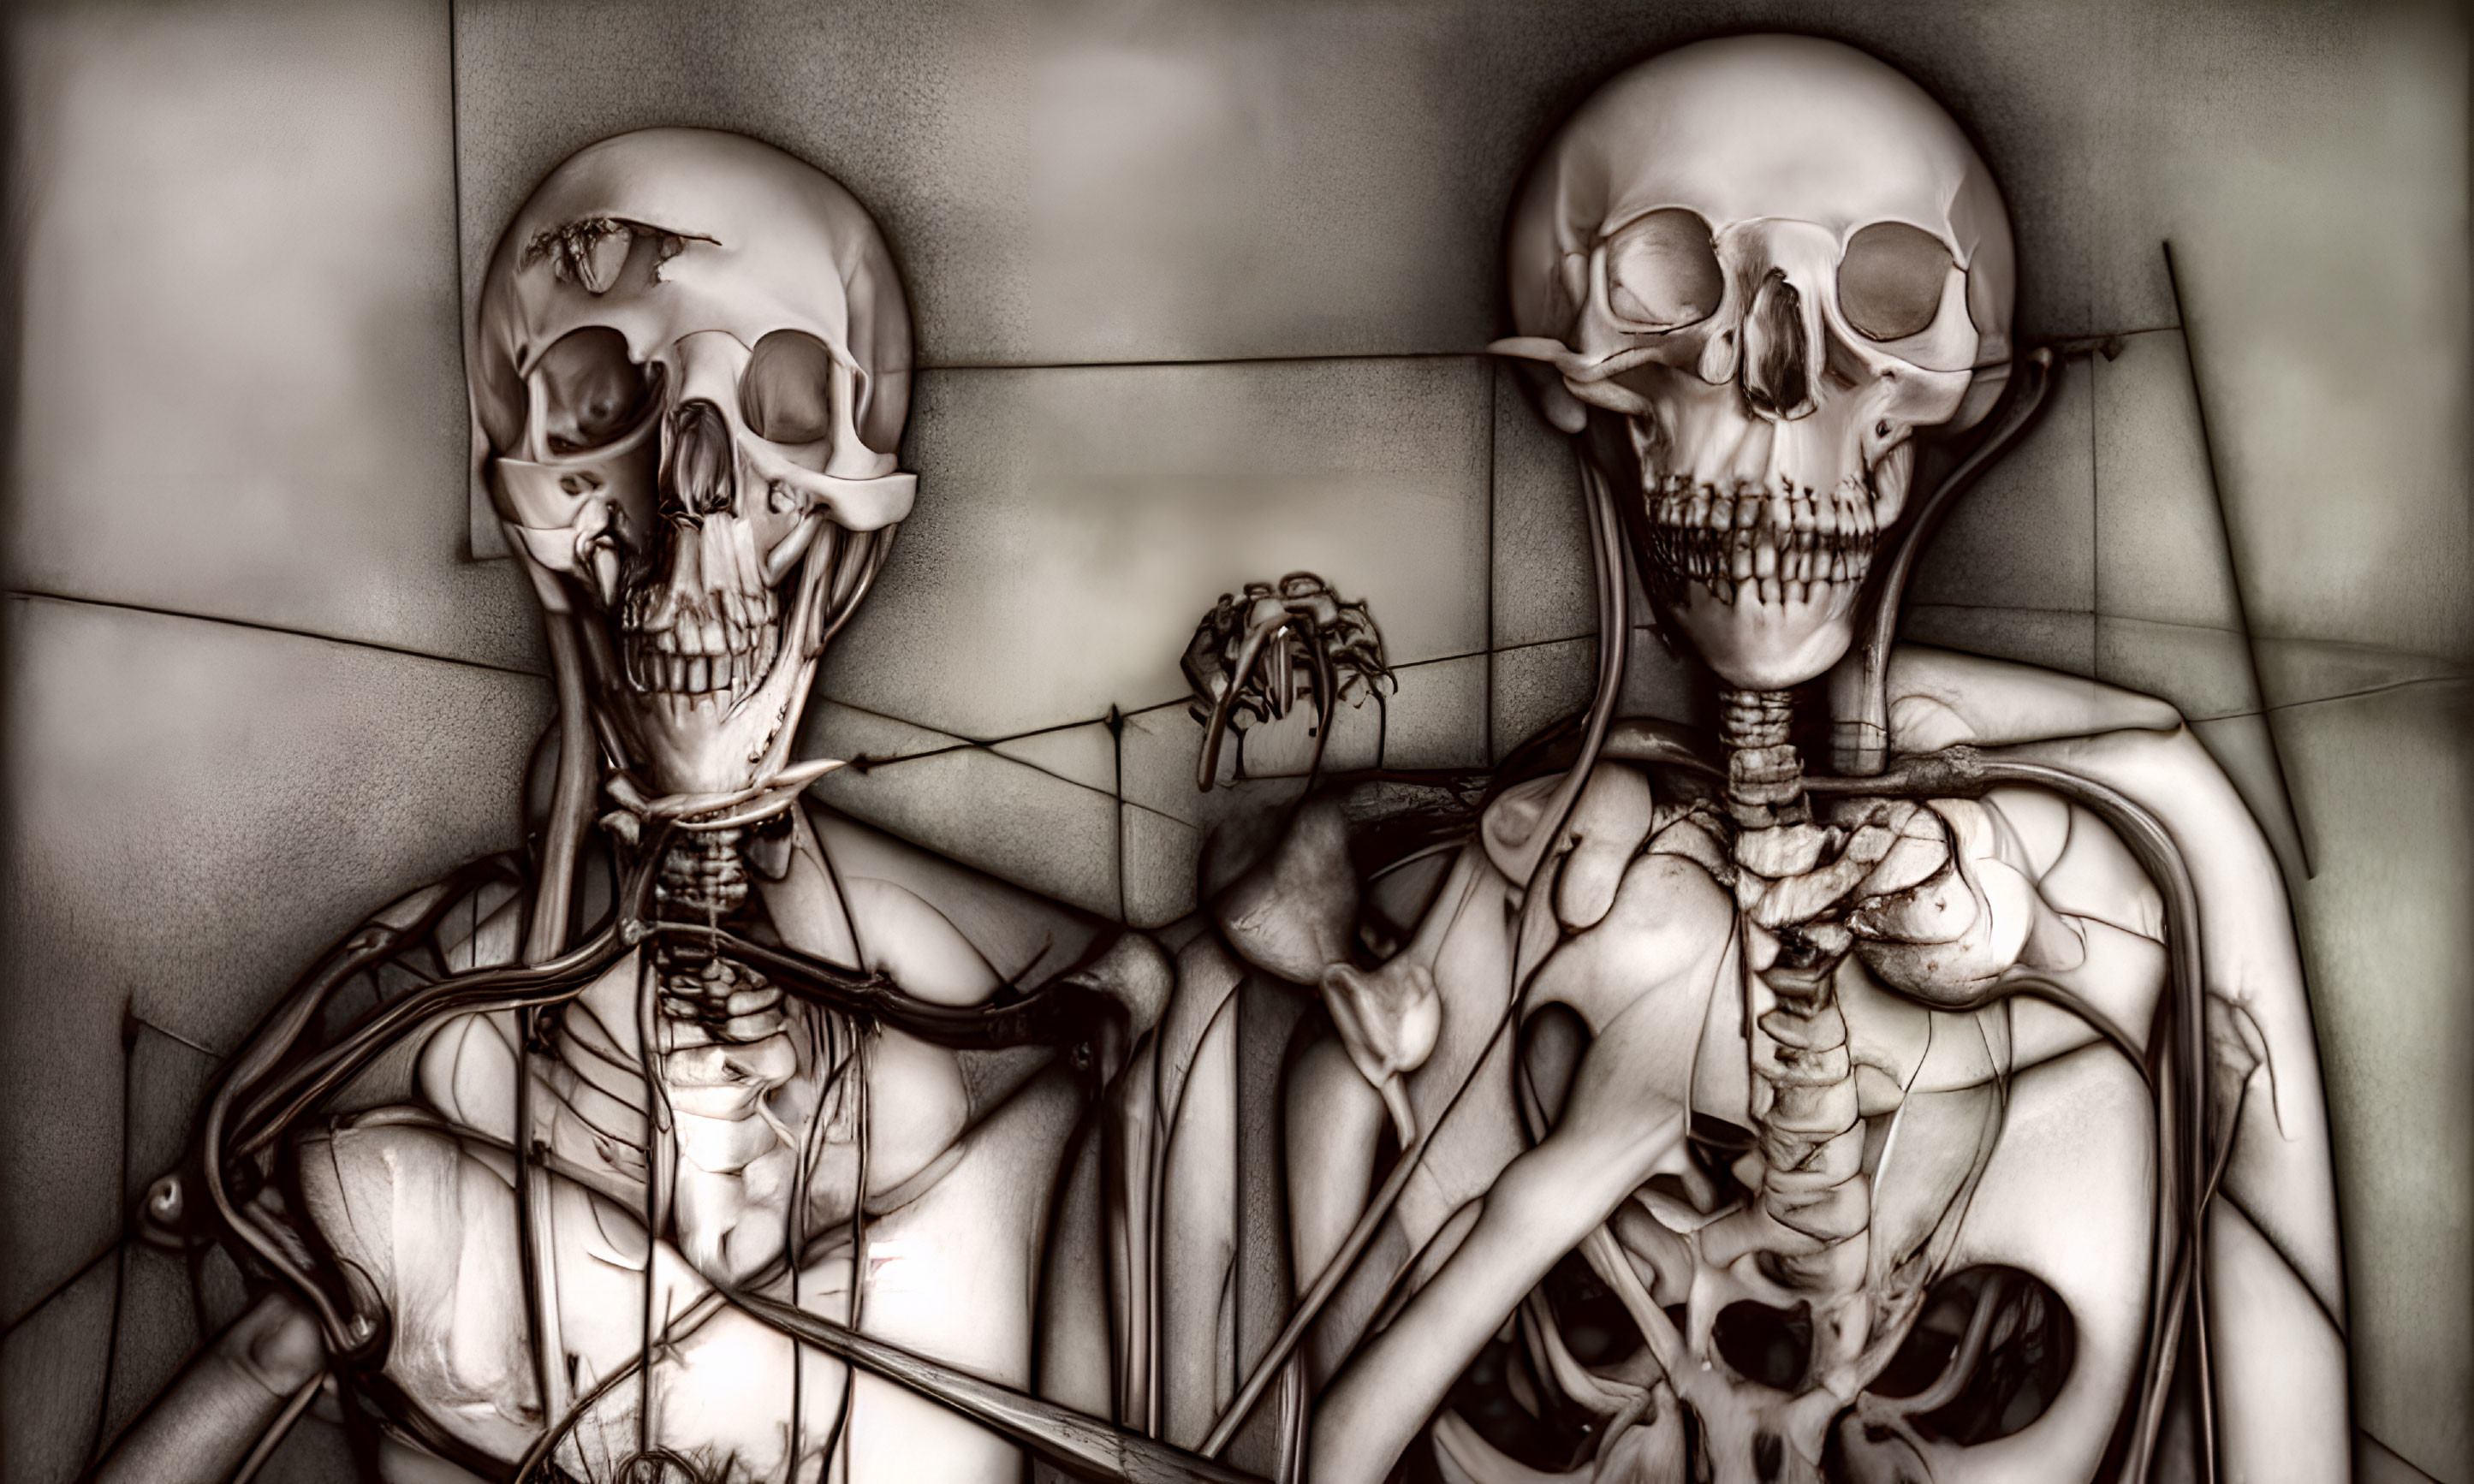 Artistic filter enhances skeletons in curious interaction.